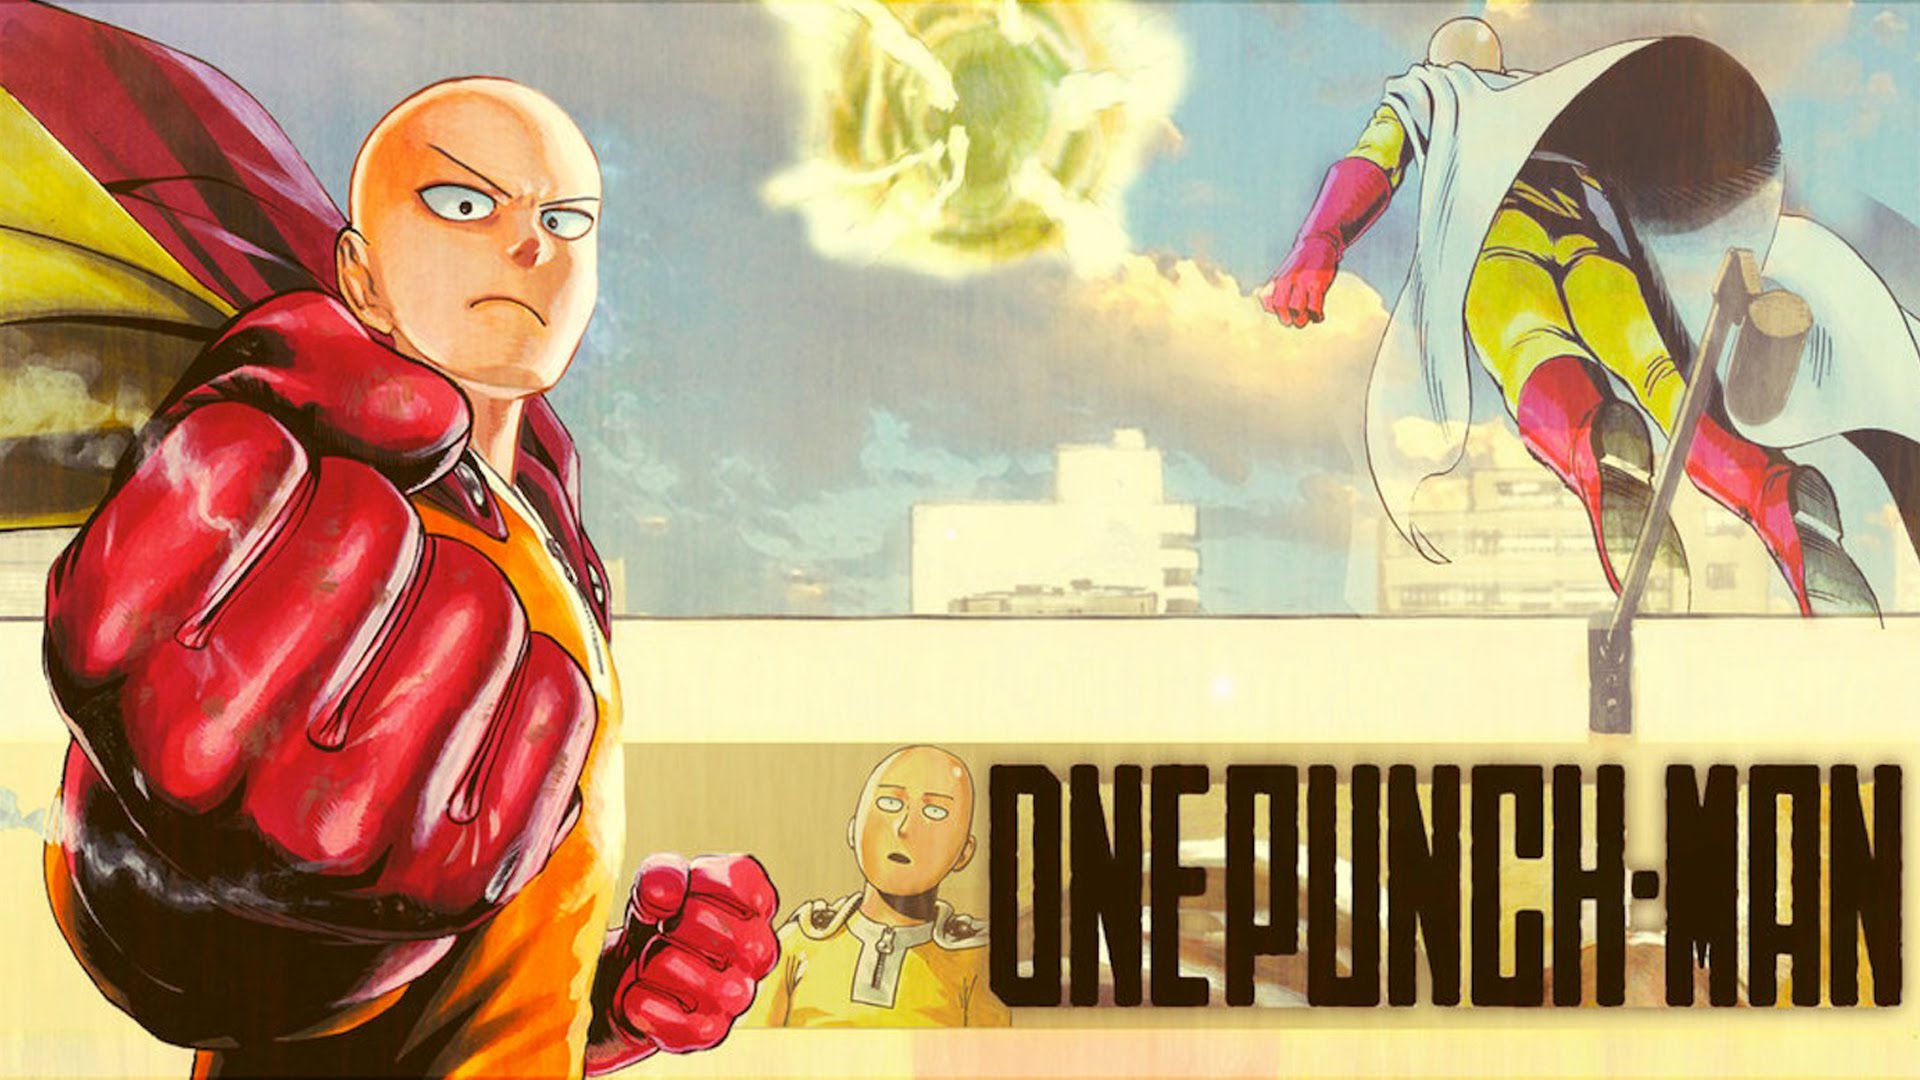 Download Saitama (One Punch Man) wallpapers for mobile phone, free  Saitama (One Punch Man) HD pictures